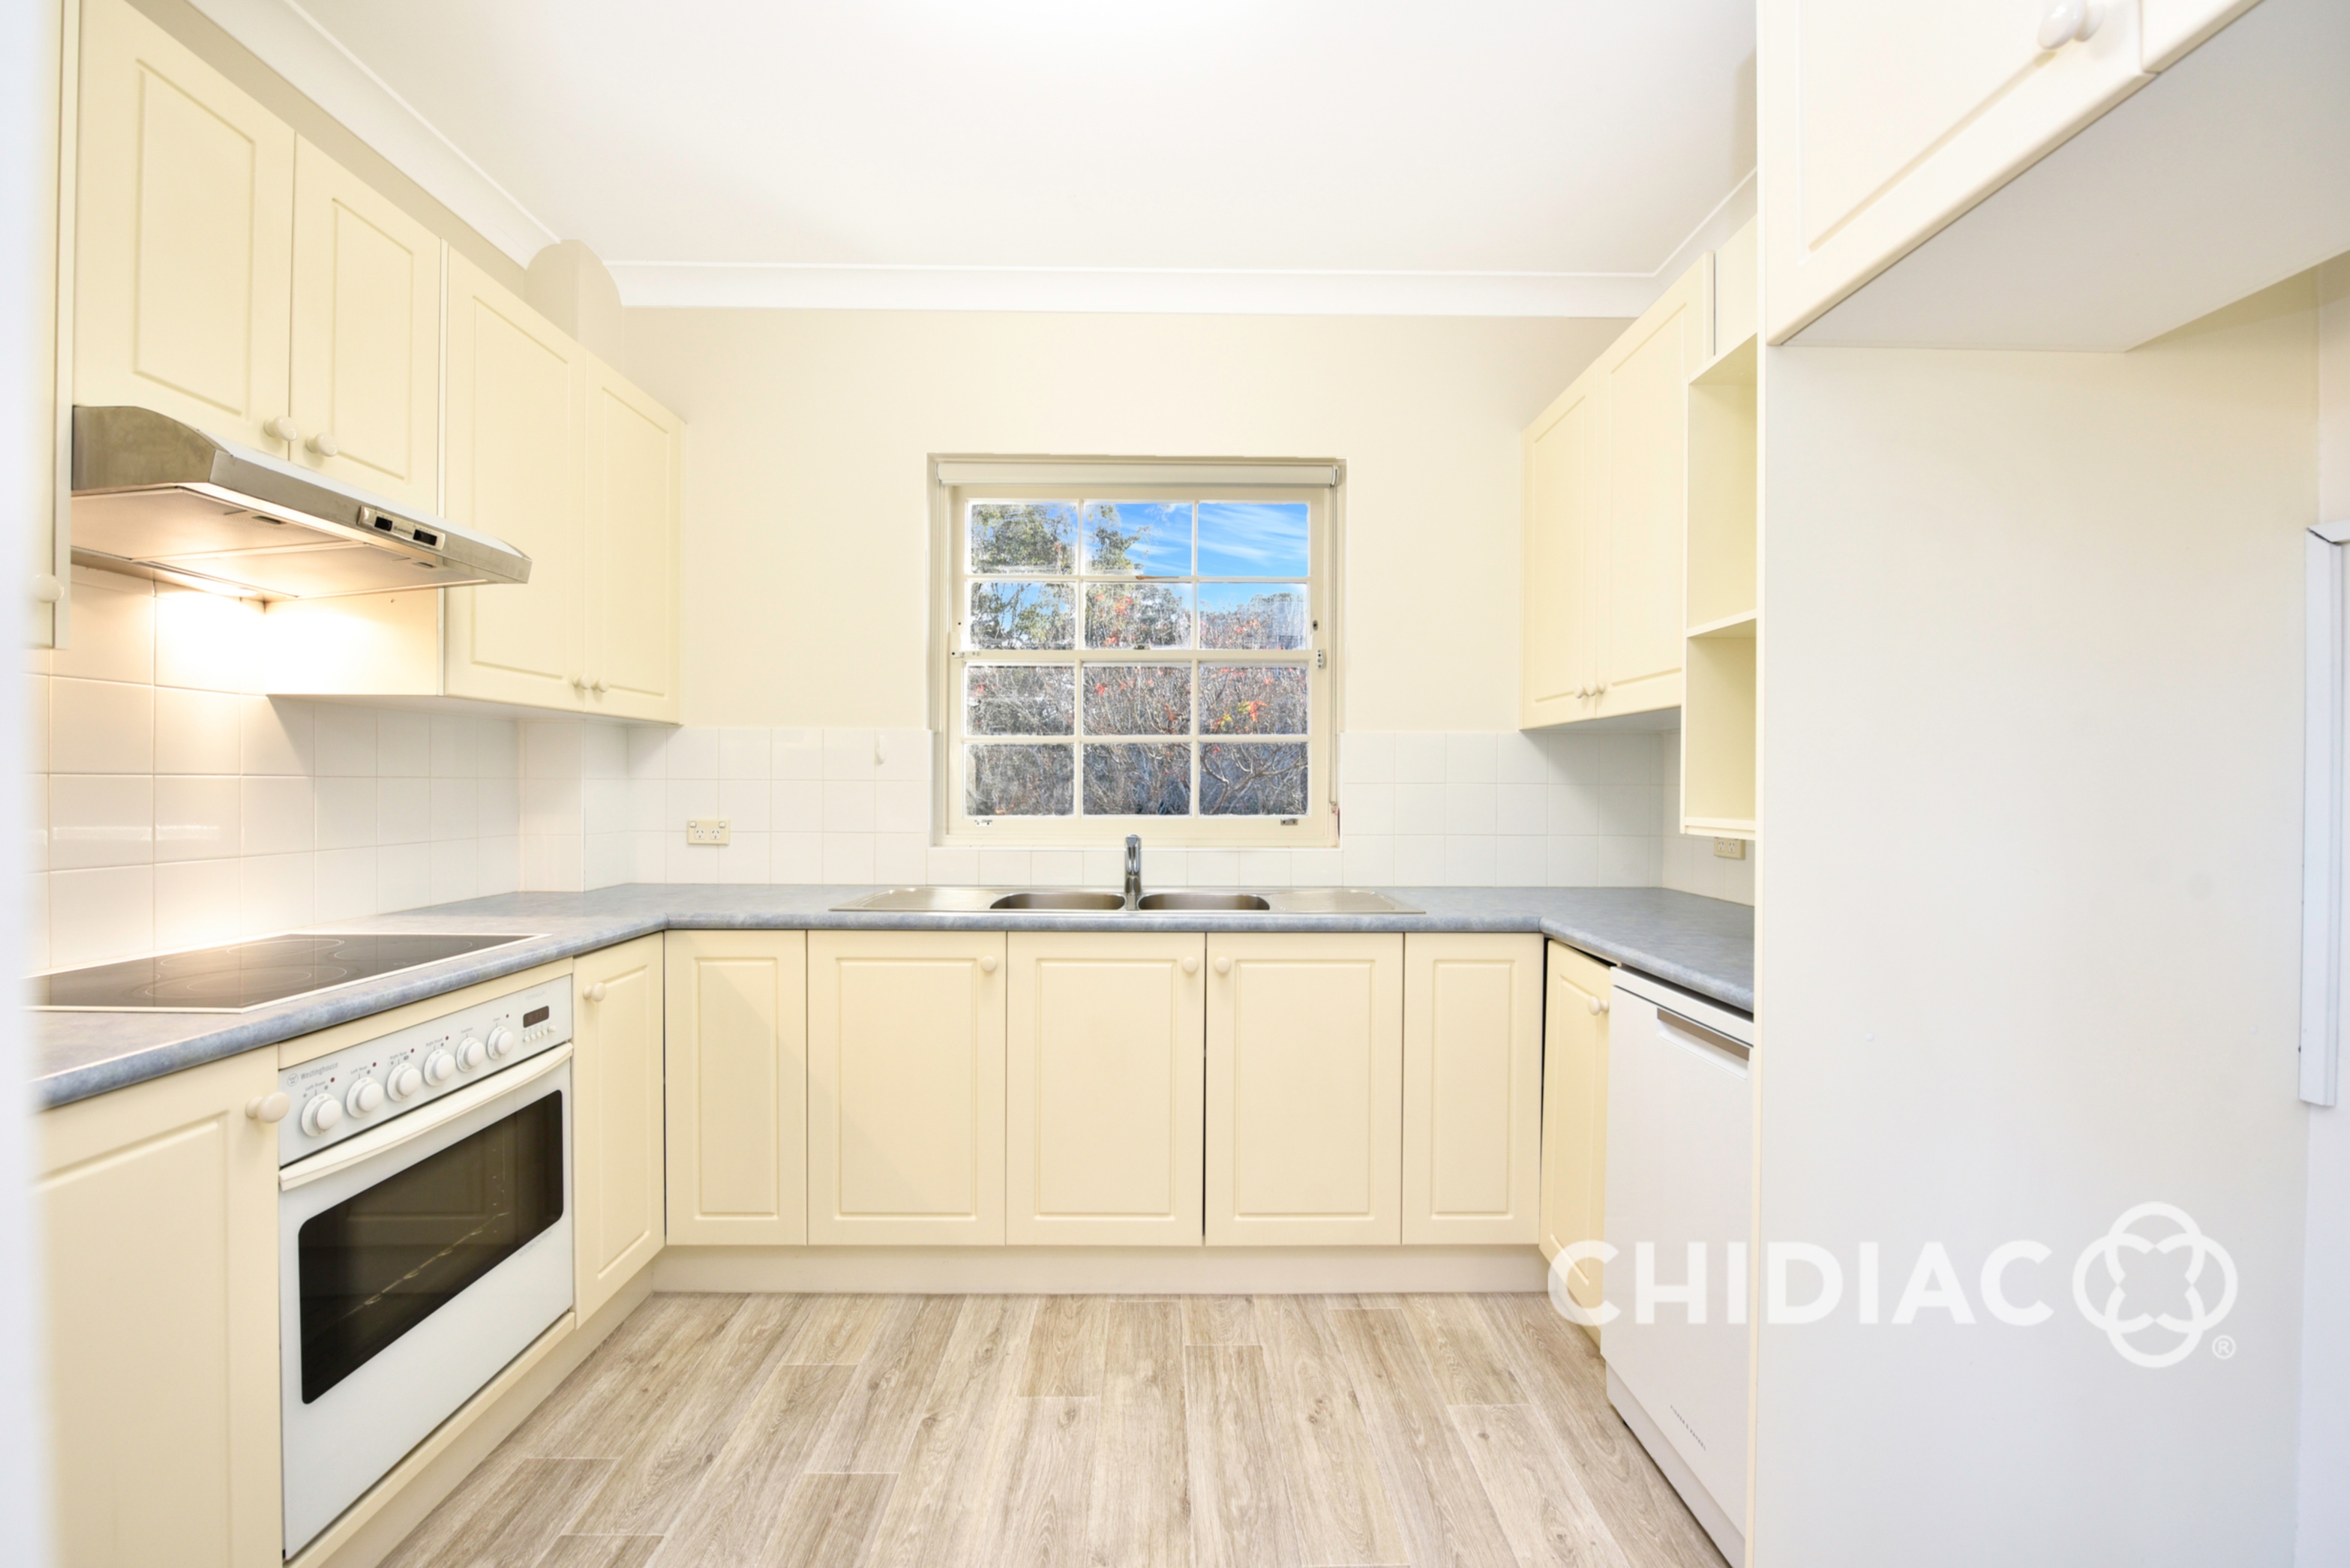 23/2 Cherry Street, Warrawee Leased by Chidiac Realty - image 5